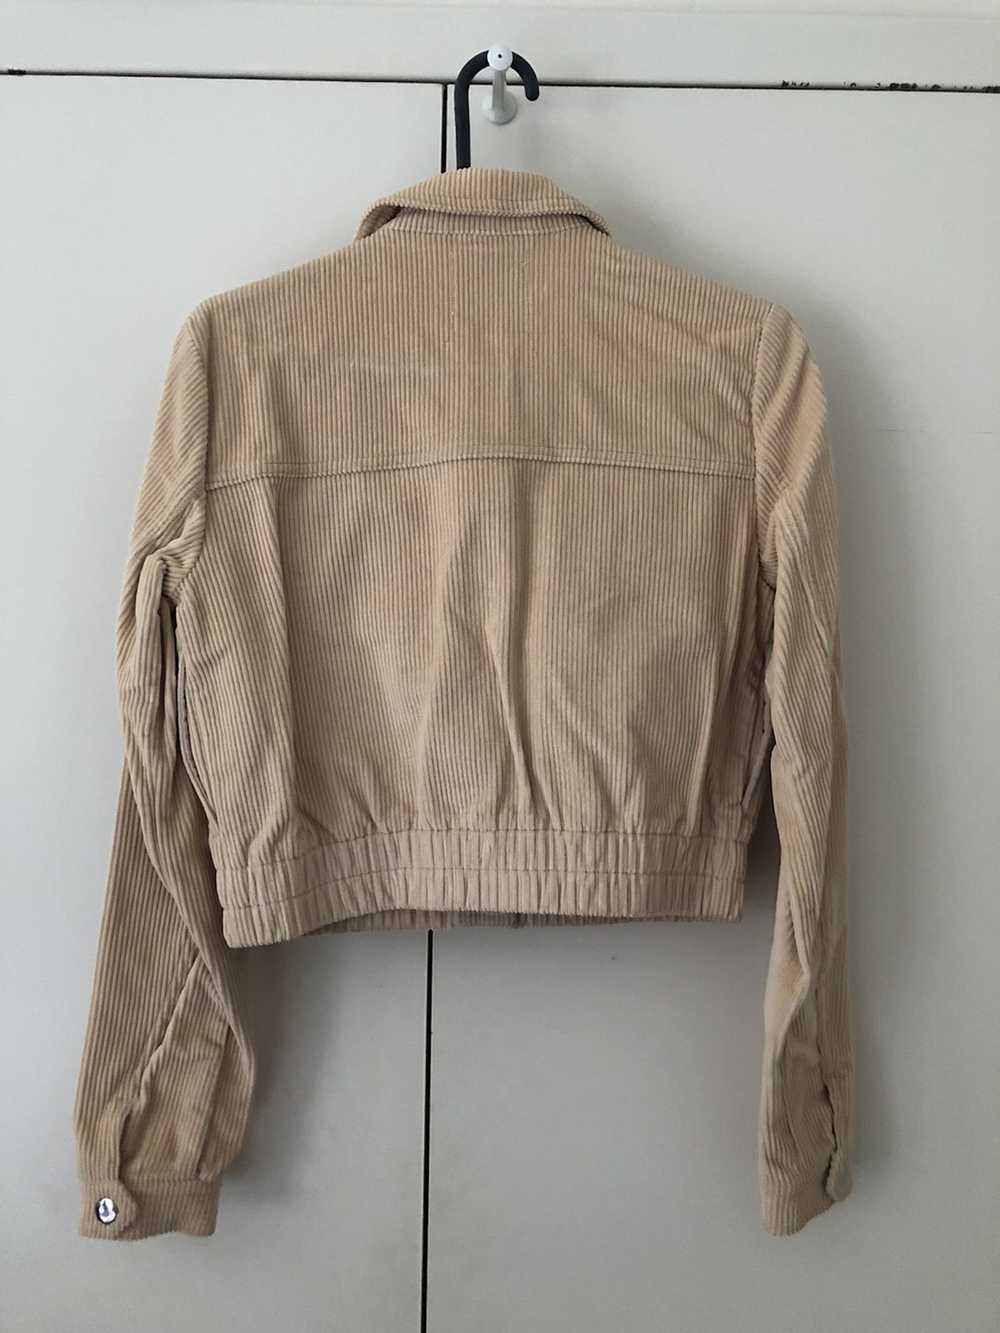 Urban Outfitters Cropped Corduroy Jacket s-p beig… - image 2